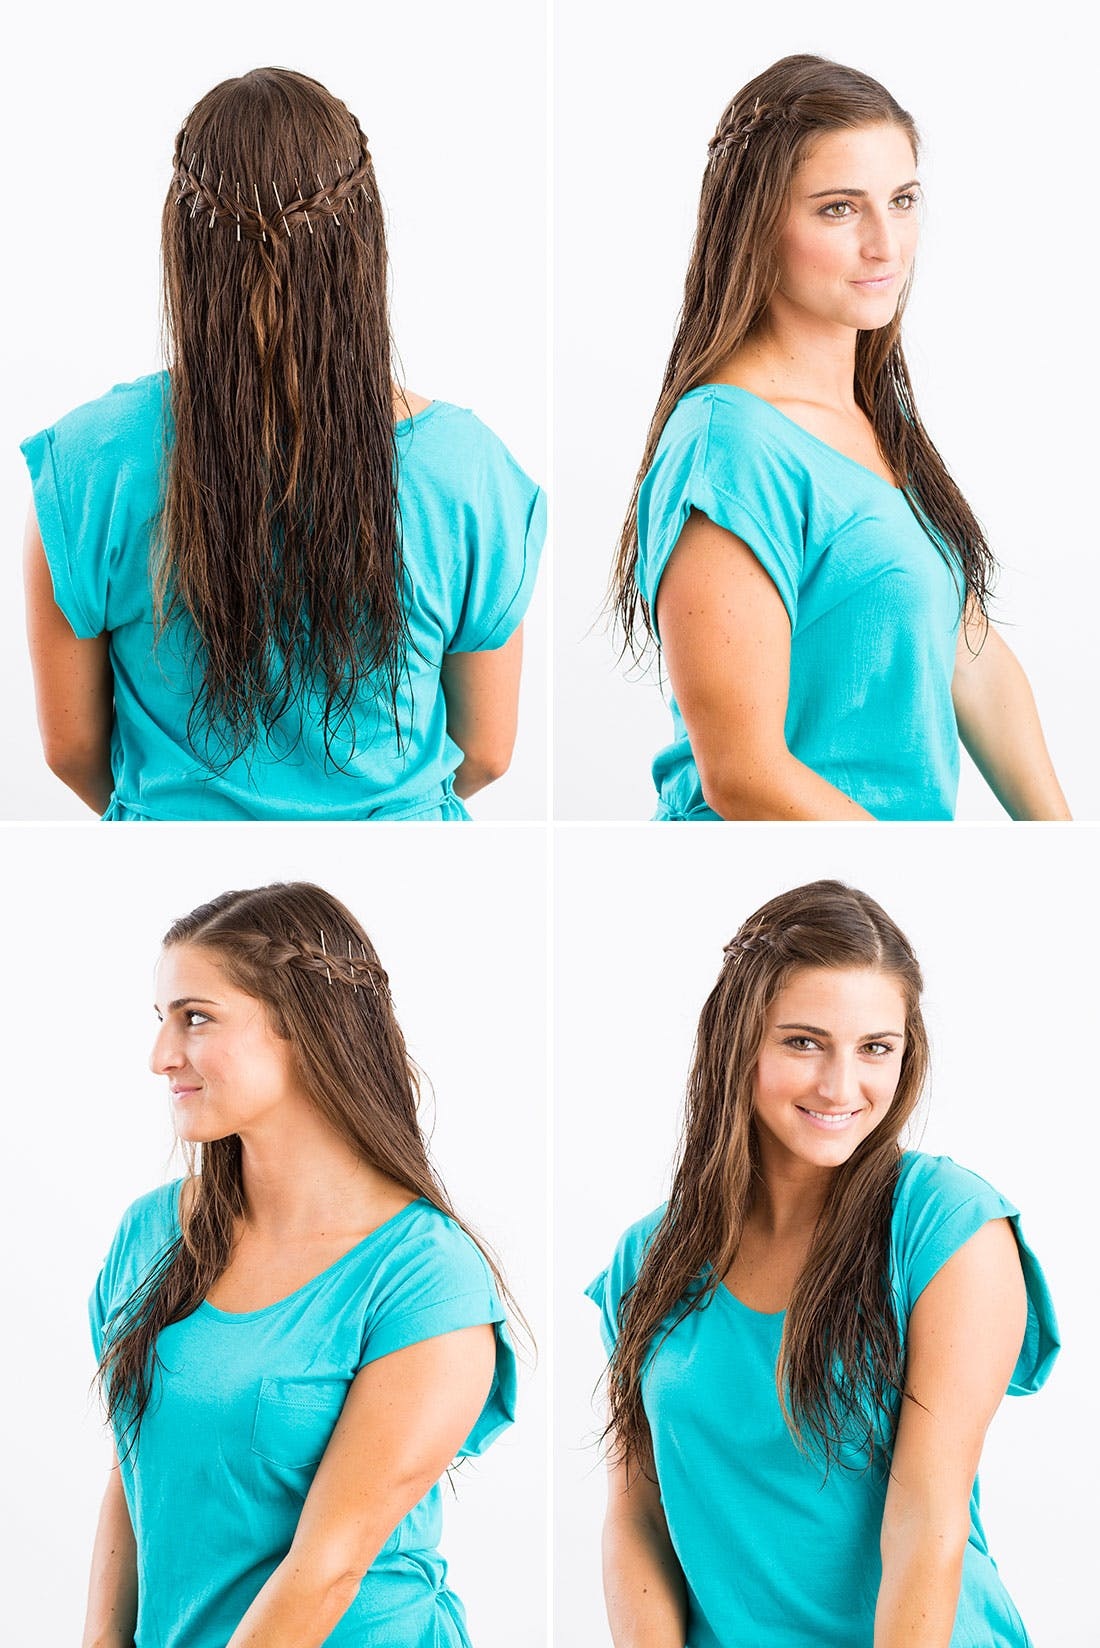 How To Style Hair Without Heat - Wet Hairdos For Summer